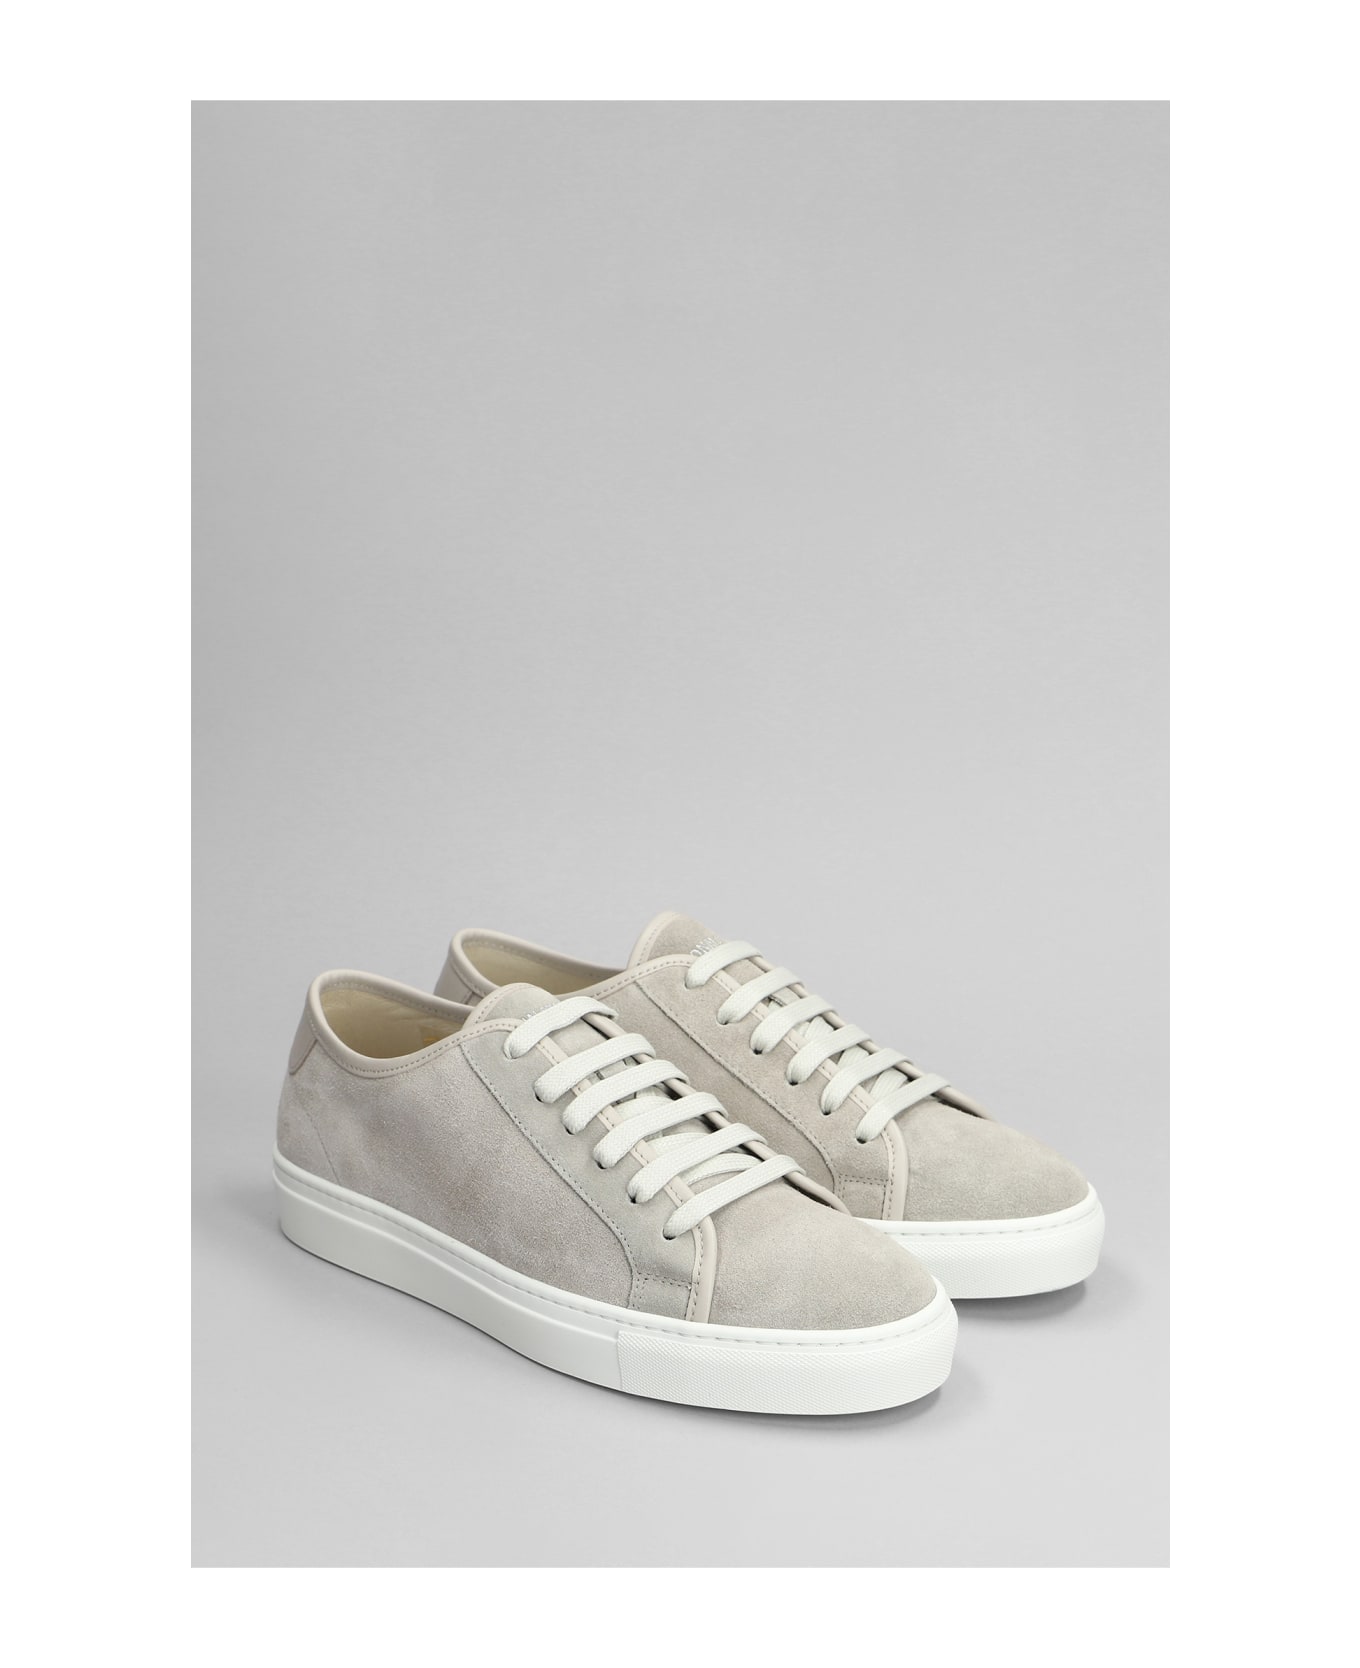 National Standard Edition 3 Low Sneakers In Grey Suede - grey スニーカー